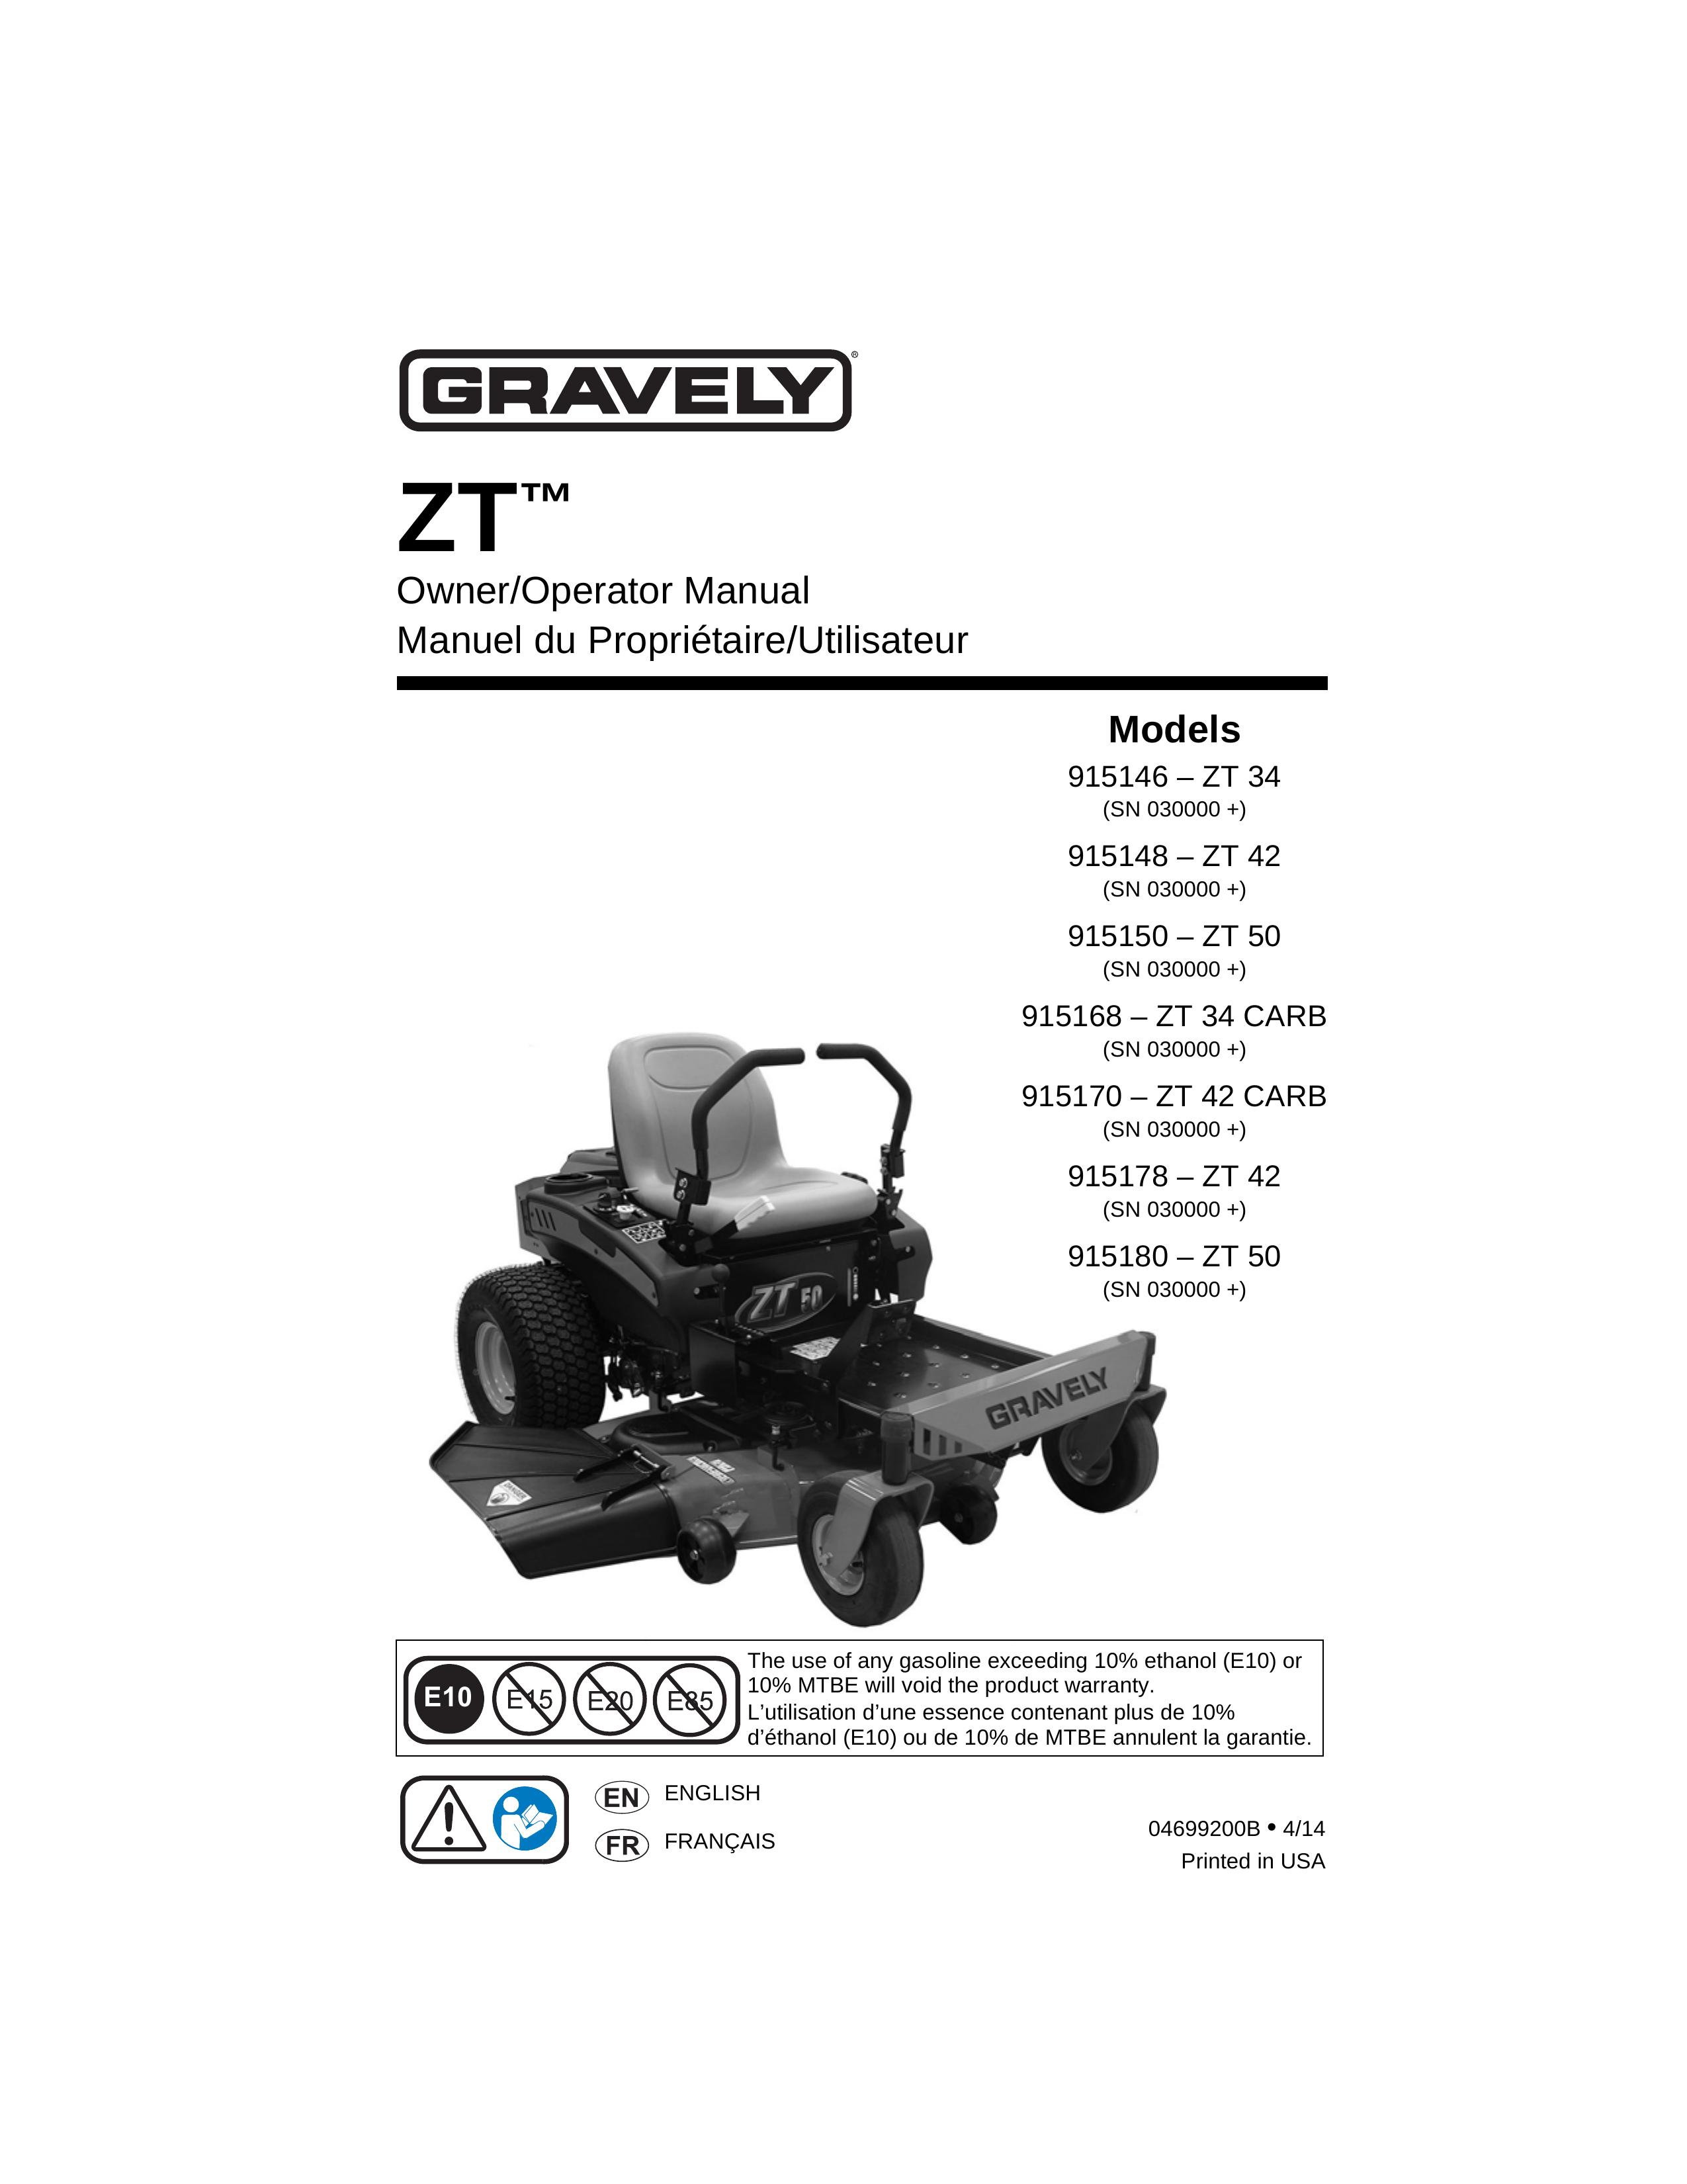 Gravely 915170 -ZT42 CARB Lawn Mower User Manual